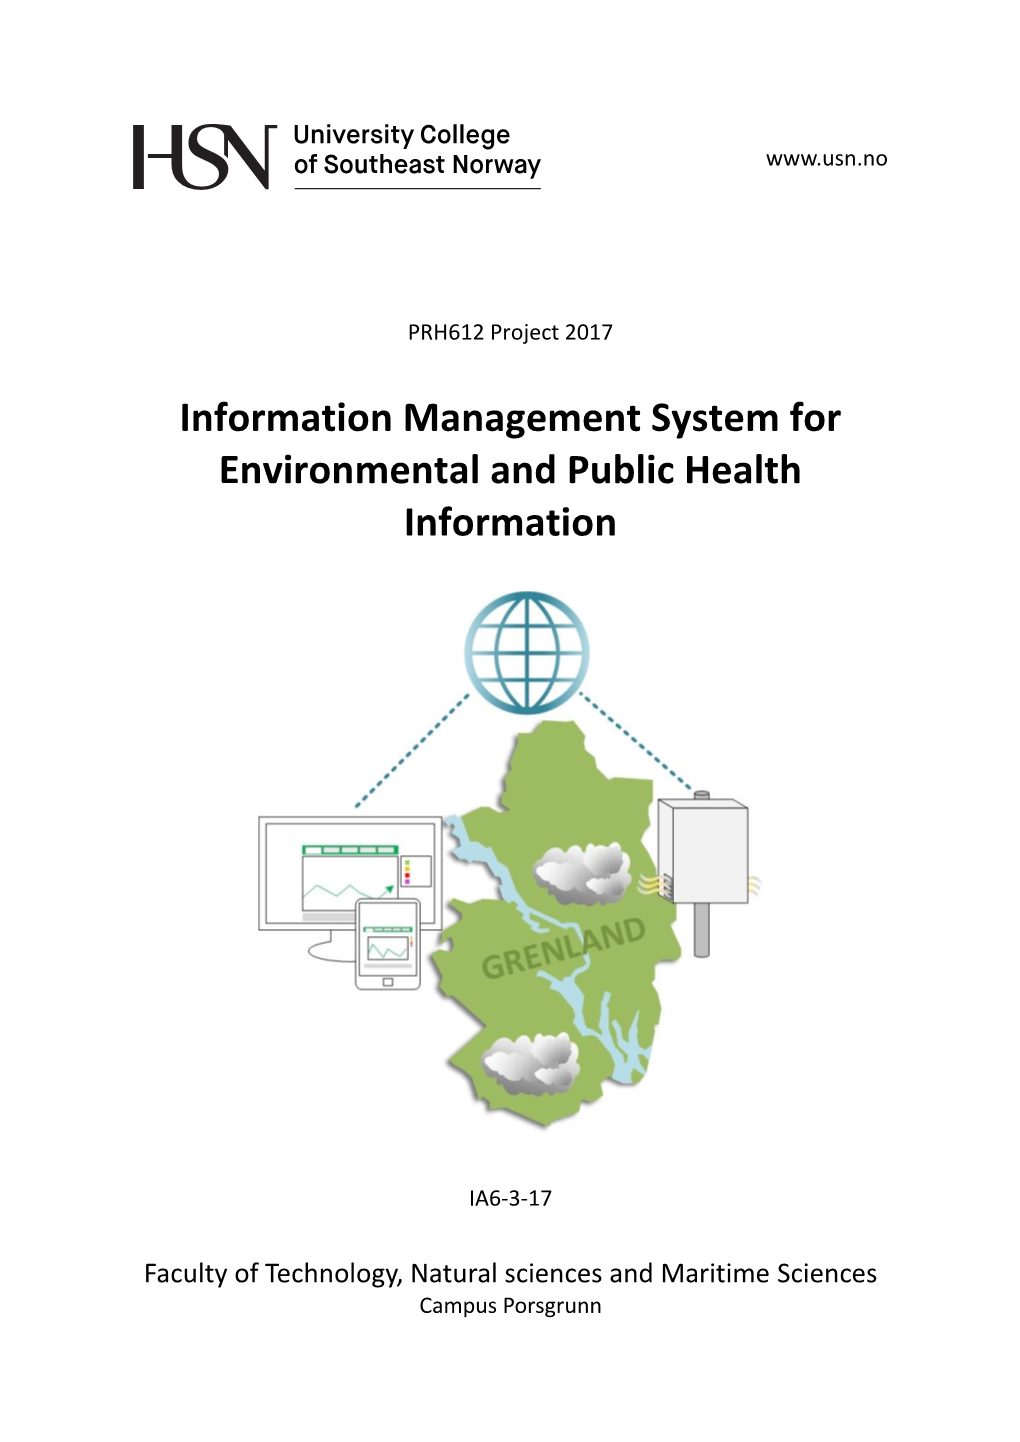 Information Management System for Environmental and Public Health Information